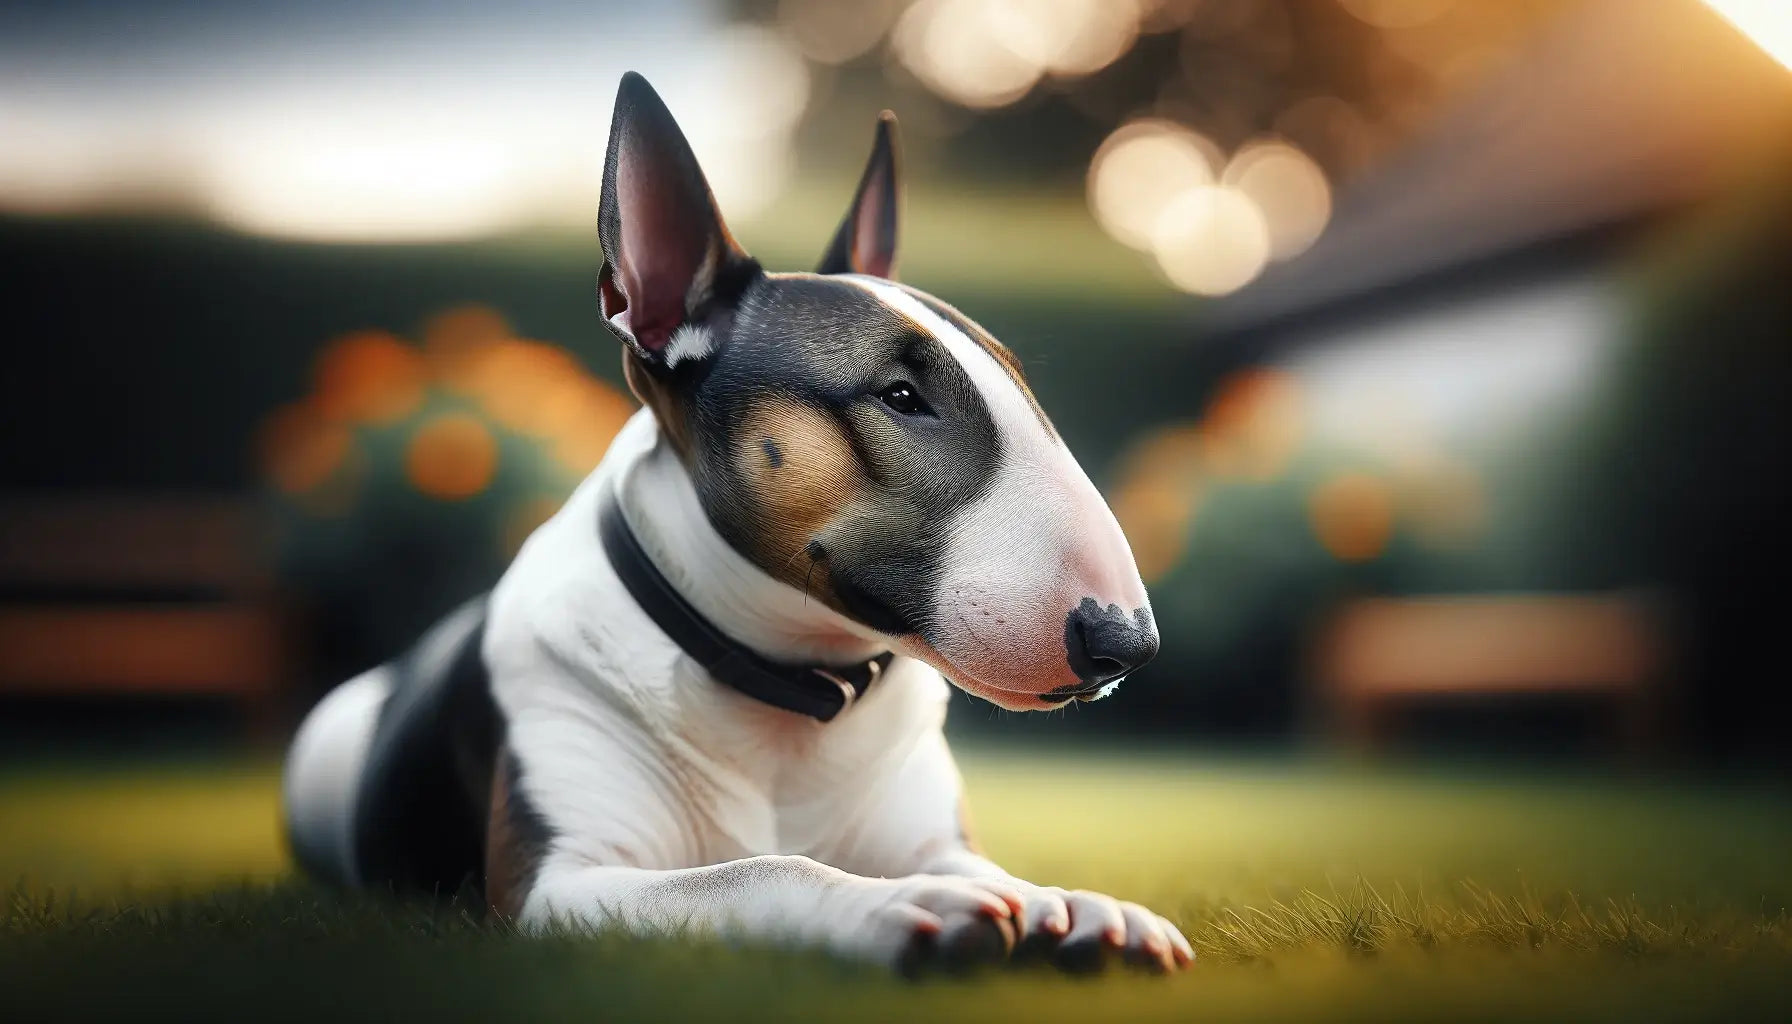 A Bull Terrier lying on the grass in a relaxed posture, with a blurred background possibly depicting a garden or park.